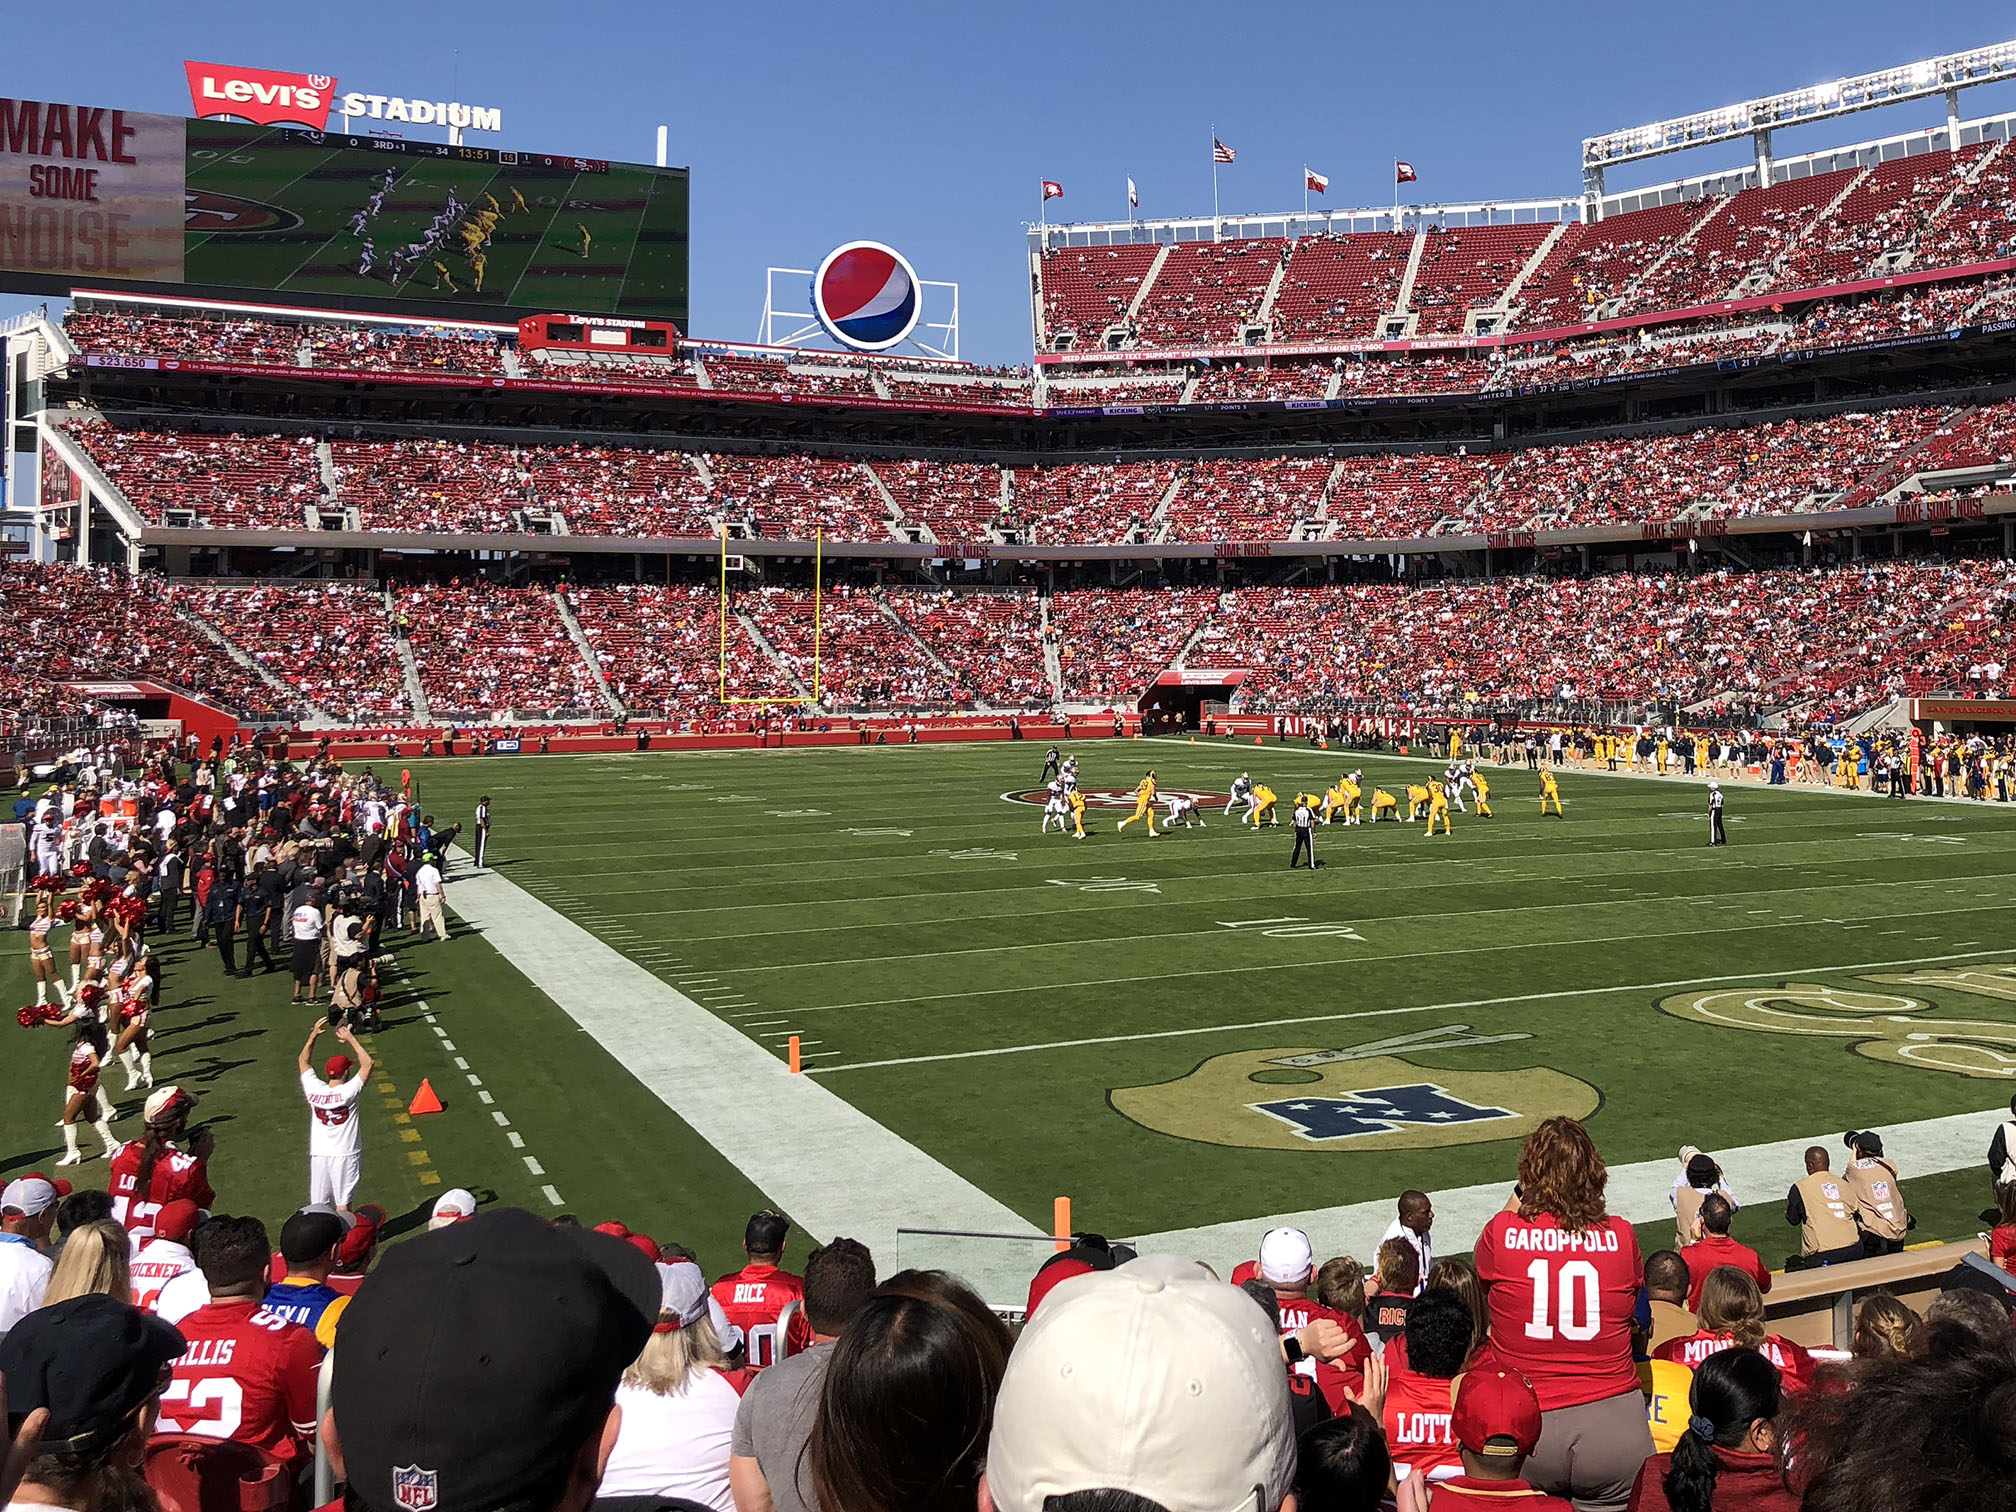 49ers Seating charts and actual views